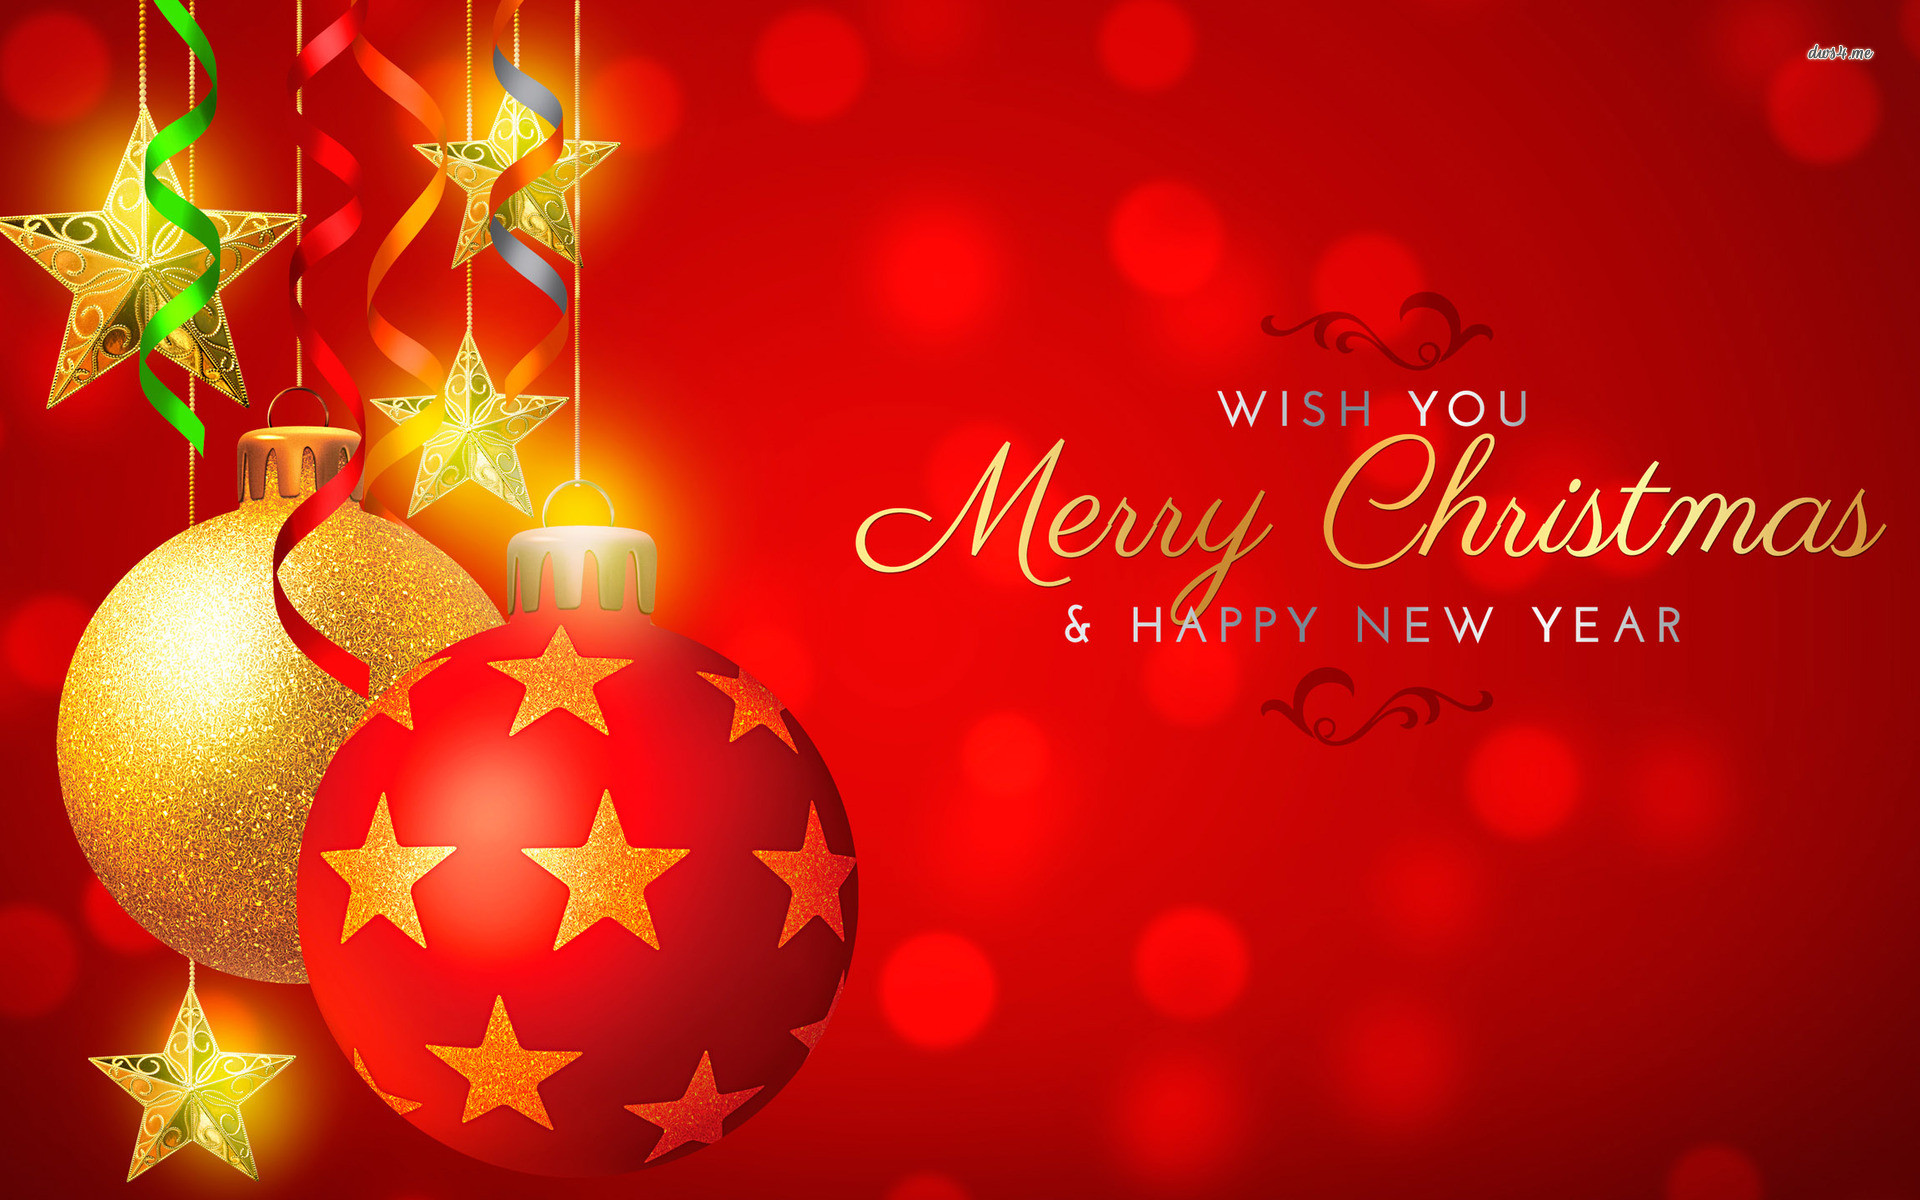 1920x1200 10 Merry Christmas Wallpapers Full HD for Desktop PC | All for Windows .